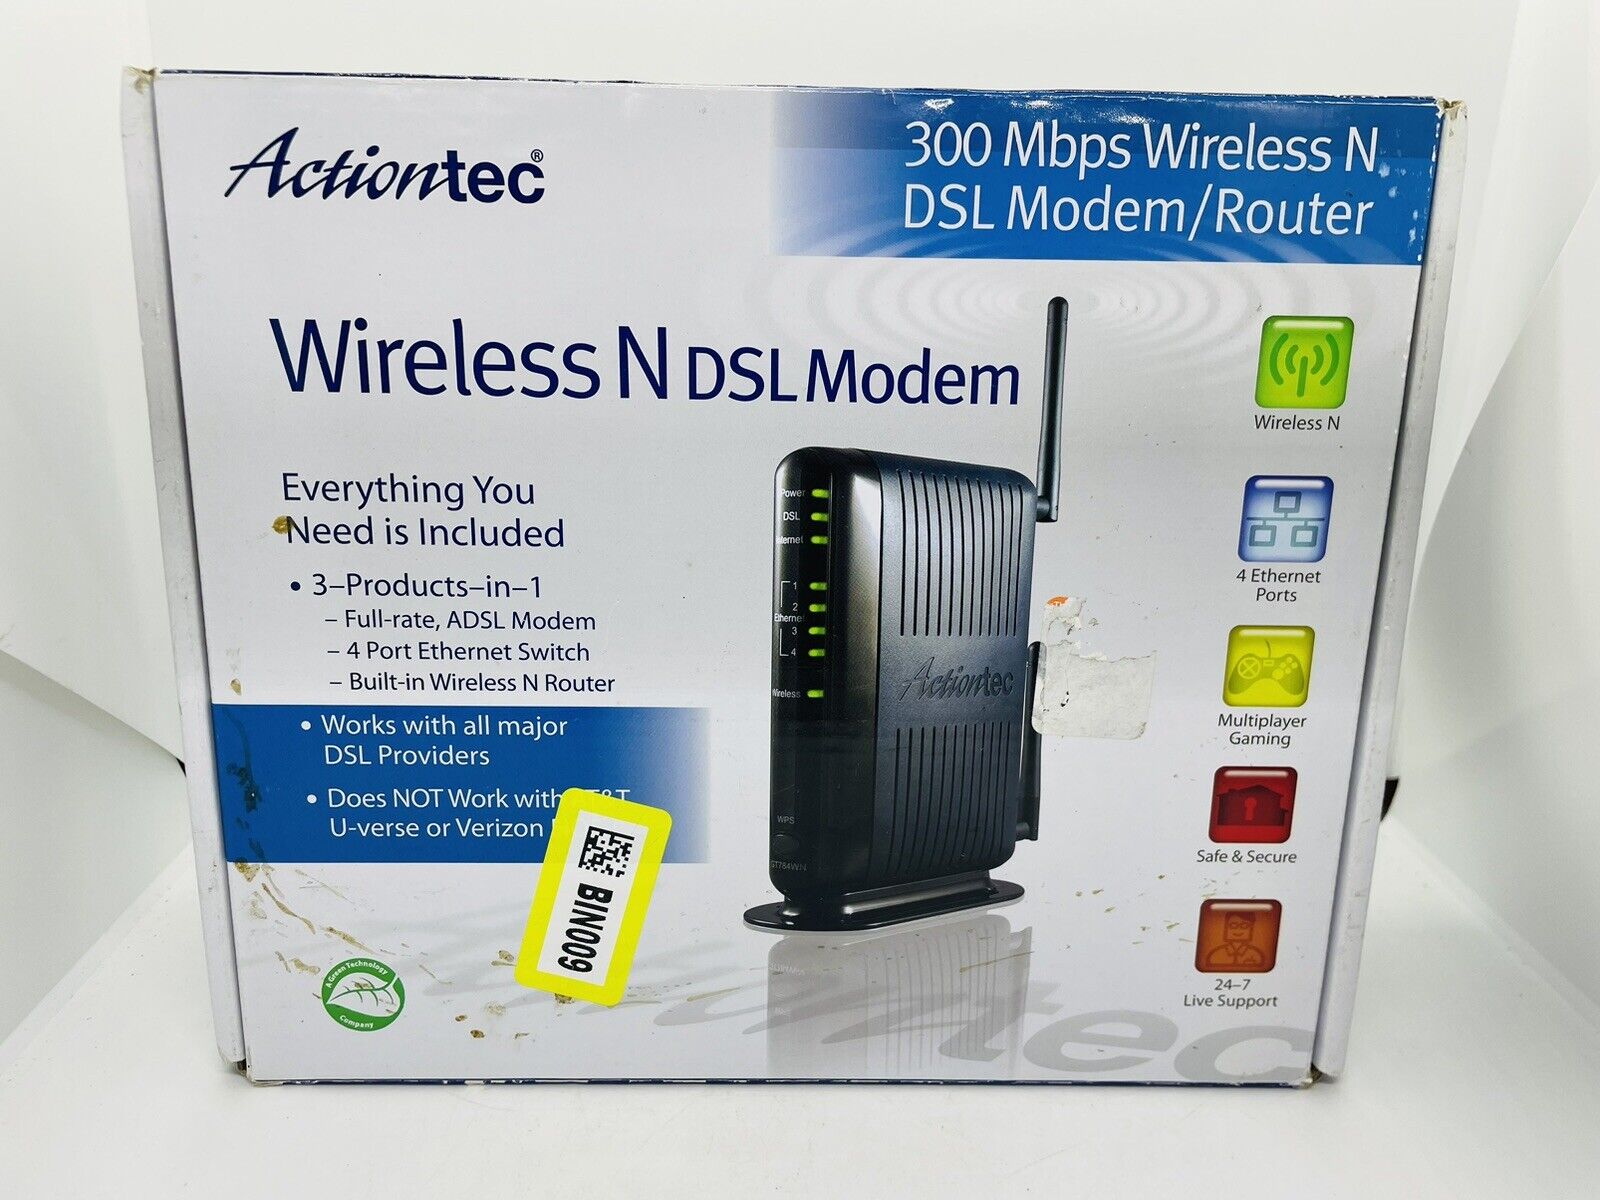 Actiontec GT784WN Wireless N DSL Modem Router 300 Mbps WiFi - Open Box